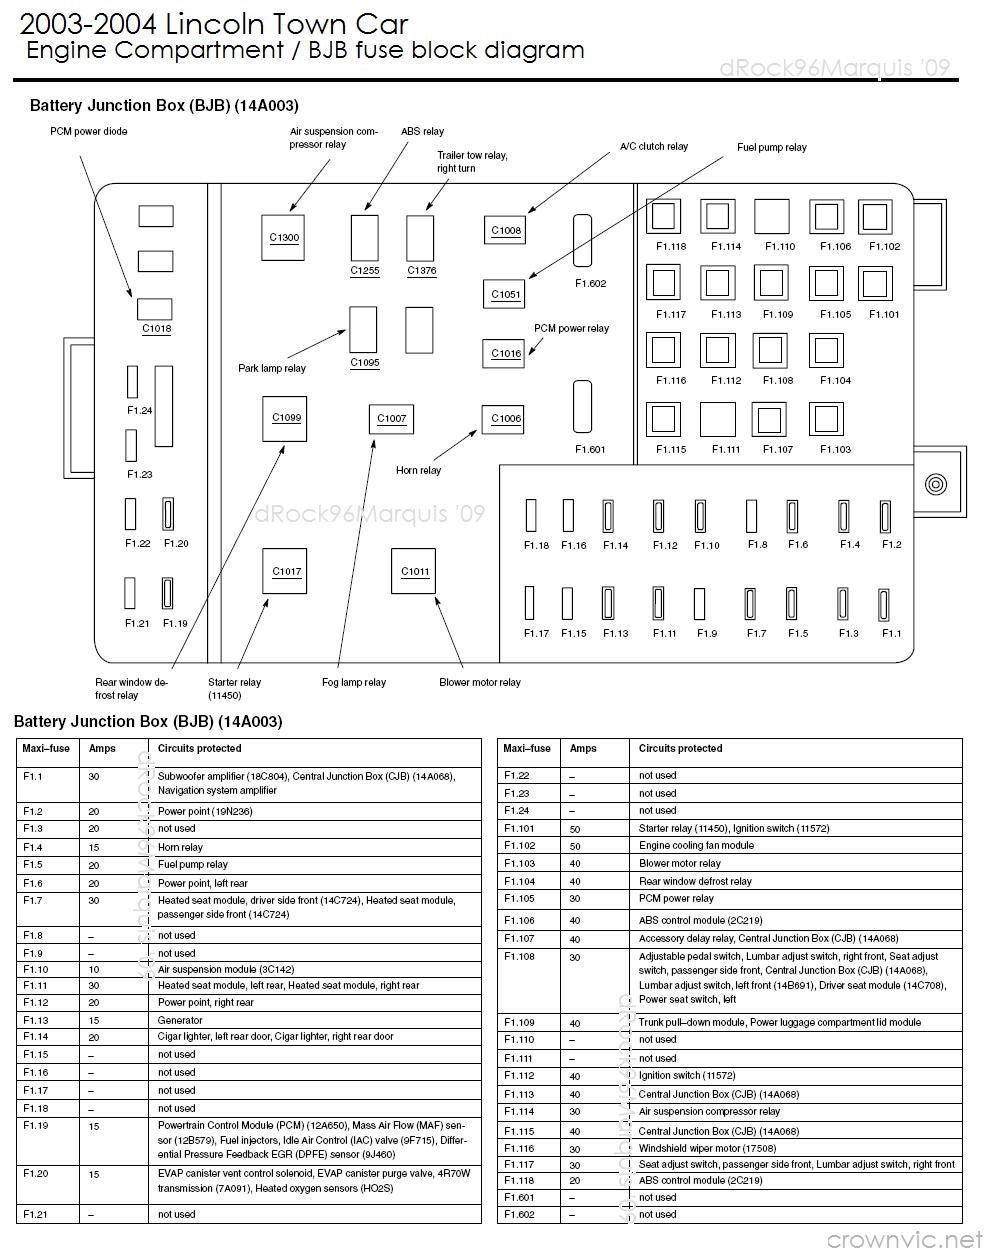 2002 Lincoln Ls Radio Wiring Diagram from www.crownvic.net